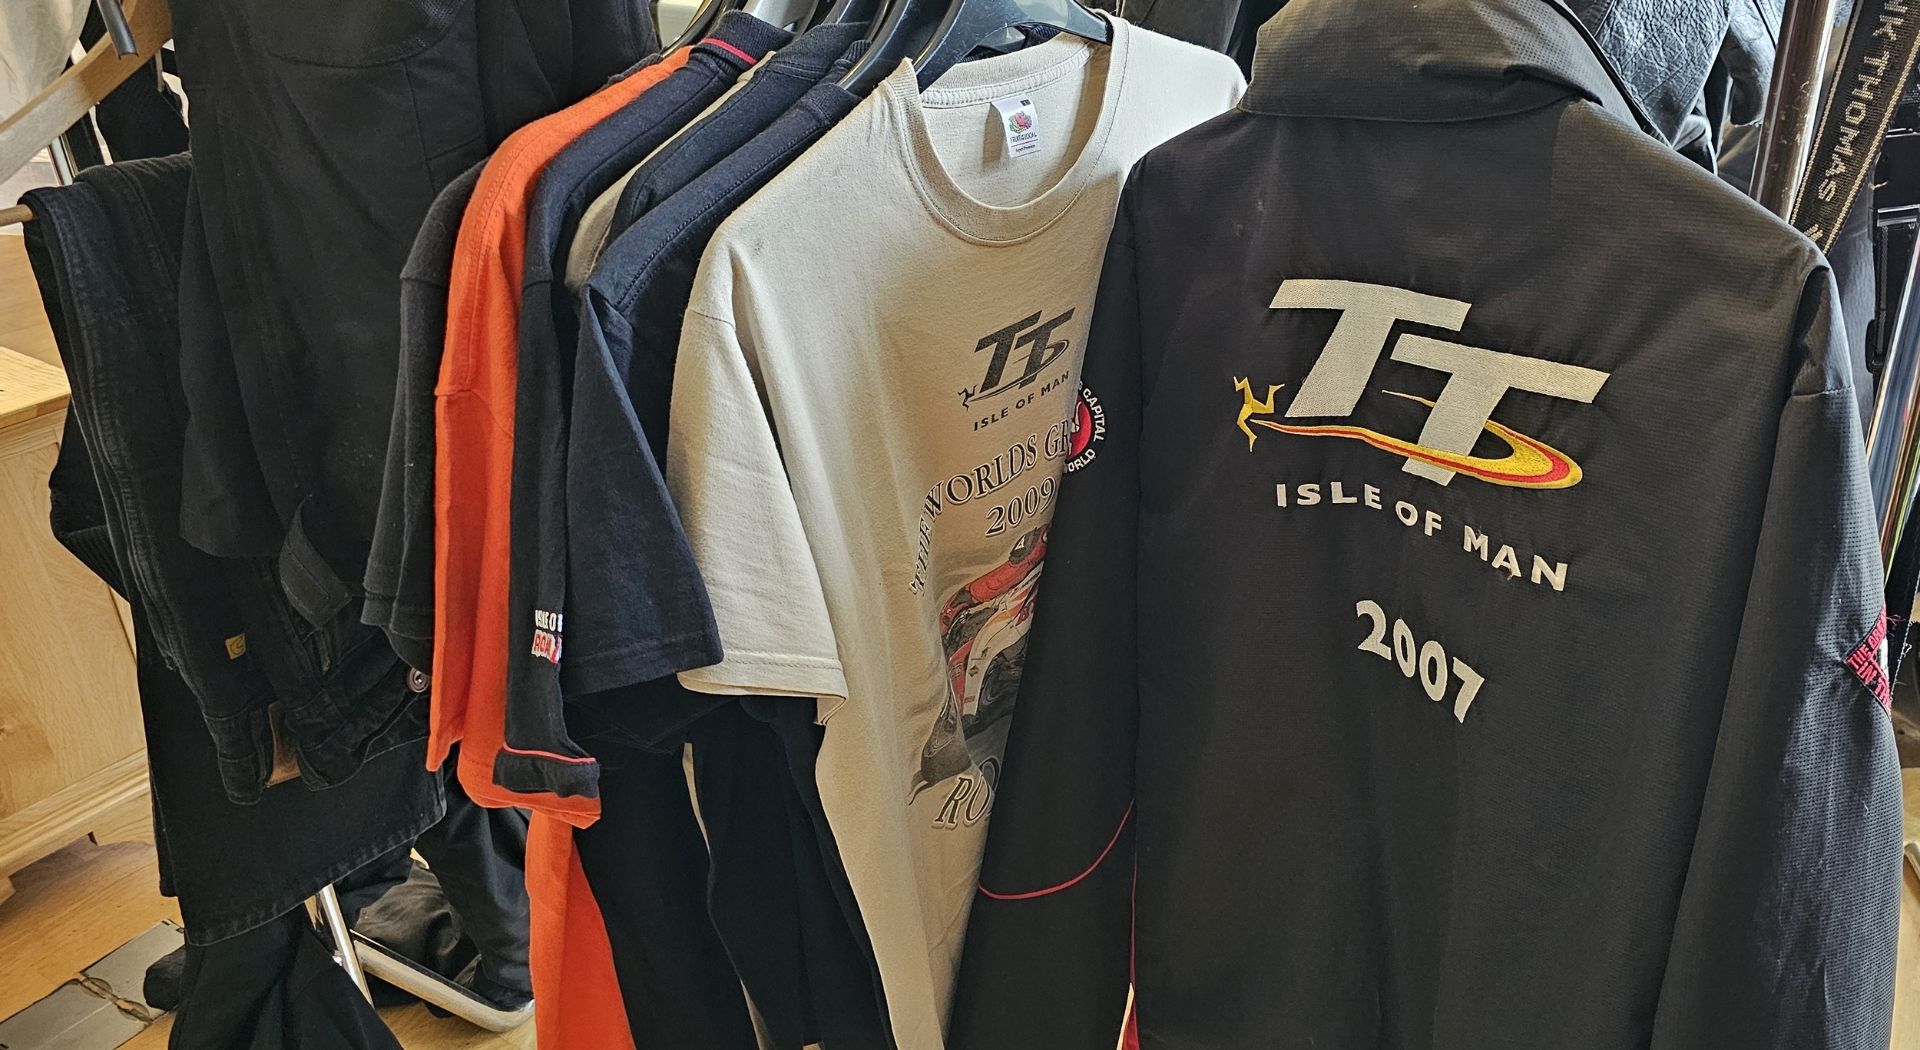 An Isle of Man 2007 TT jacket, size XL, 10 Isle of Man tee shirts and 3 pairs of trousers